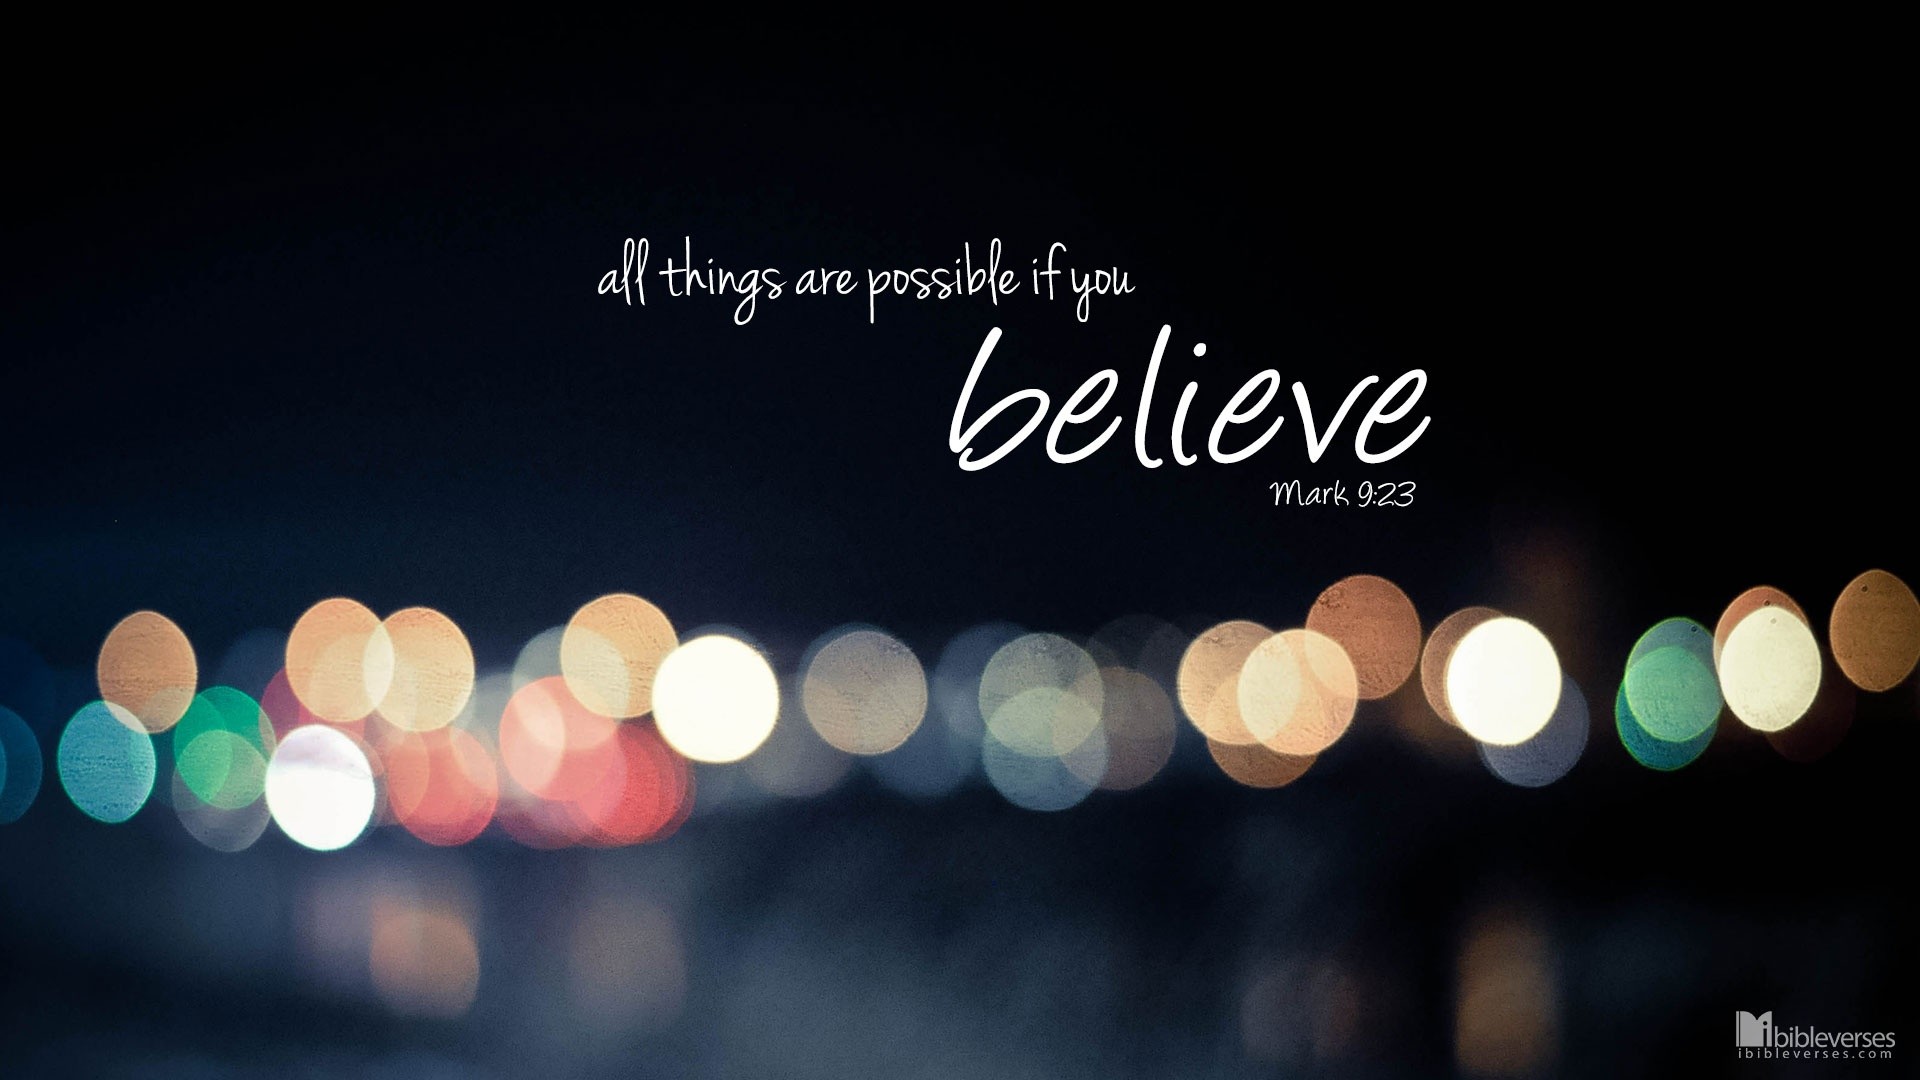 1920x1080 By ibibleverses On May 13, 2014